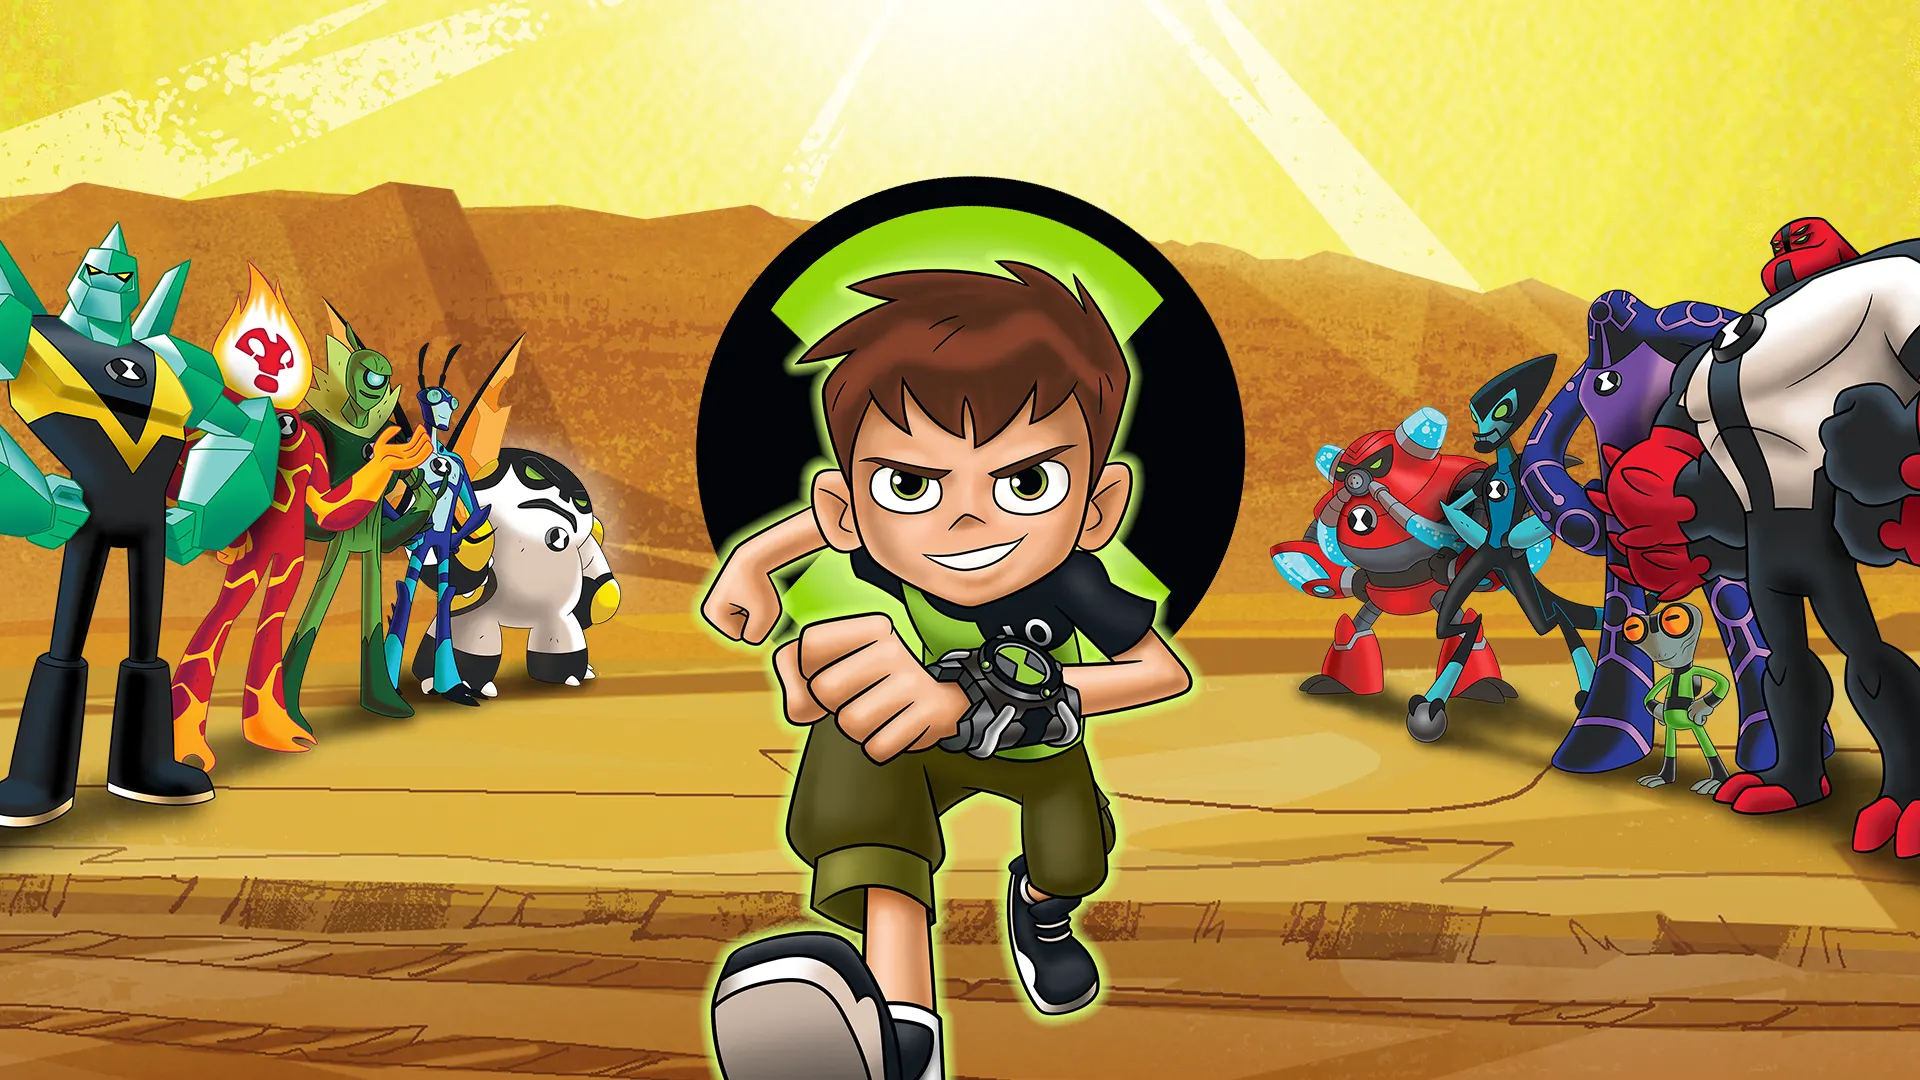 A new Ben 10 game is coming to the PC in Fall 2020